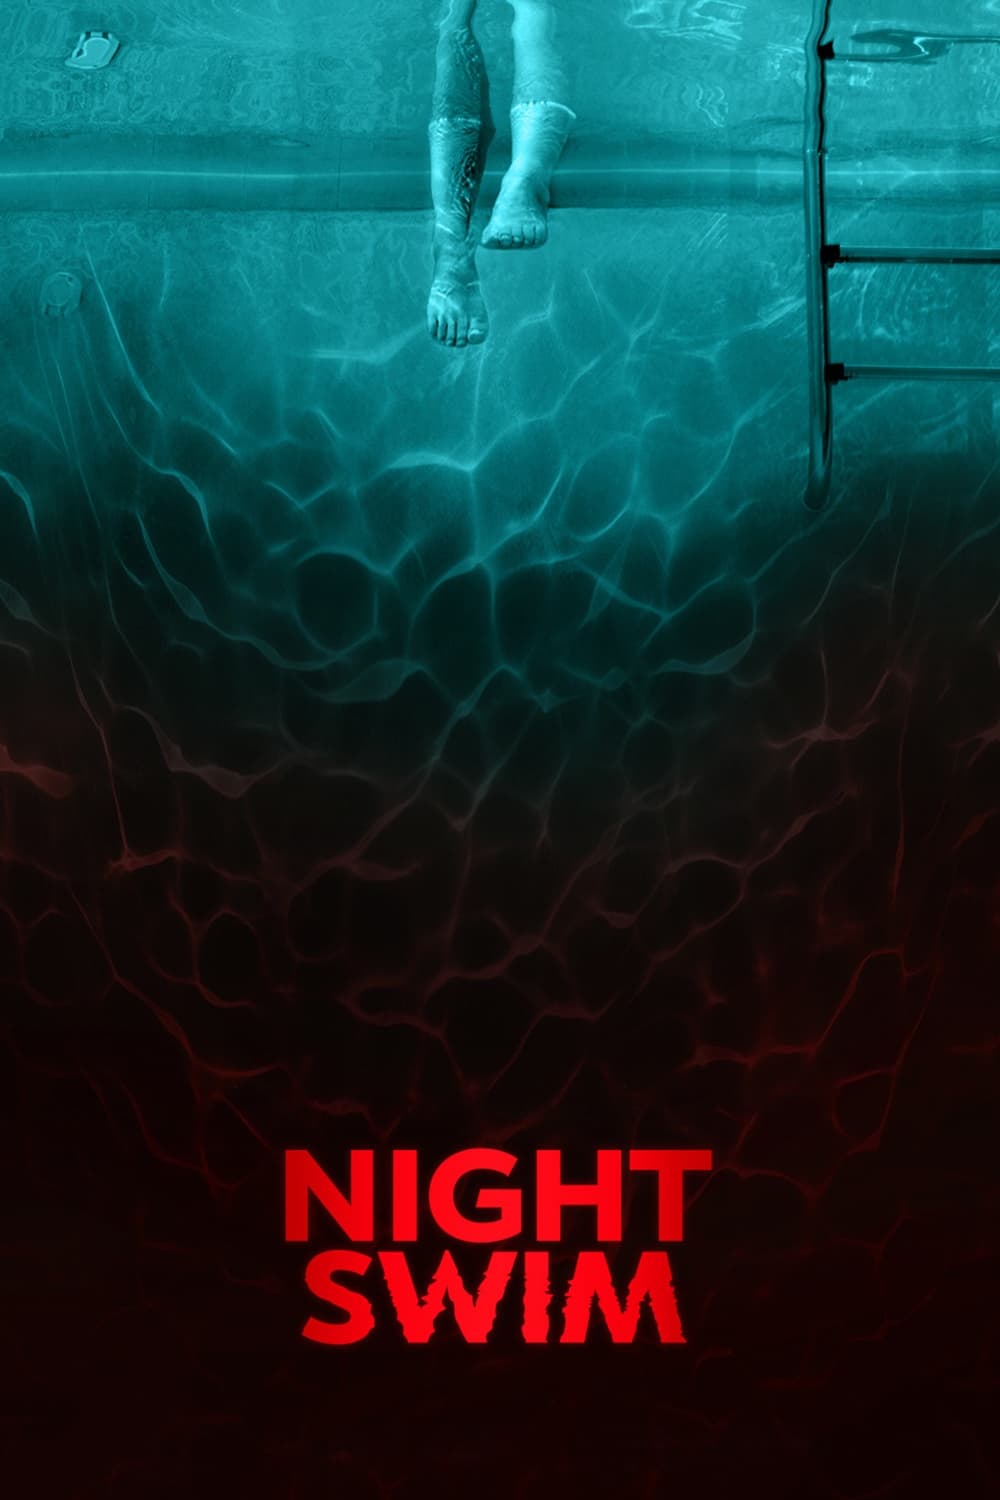 Poster for the movie "Night Swim"